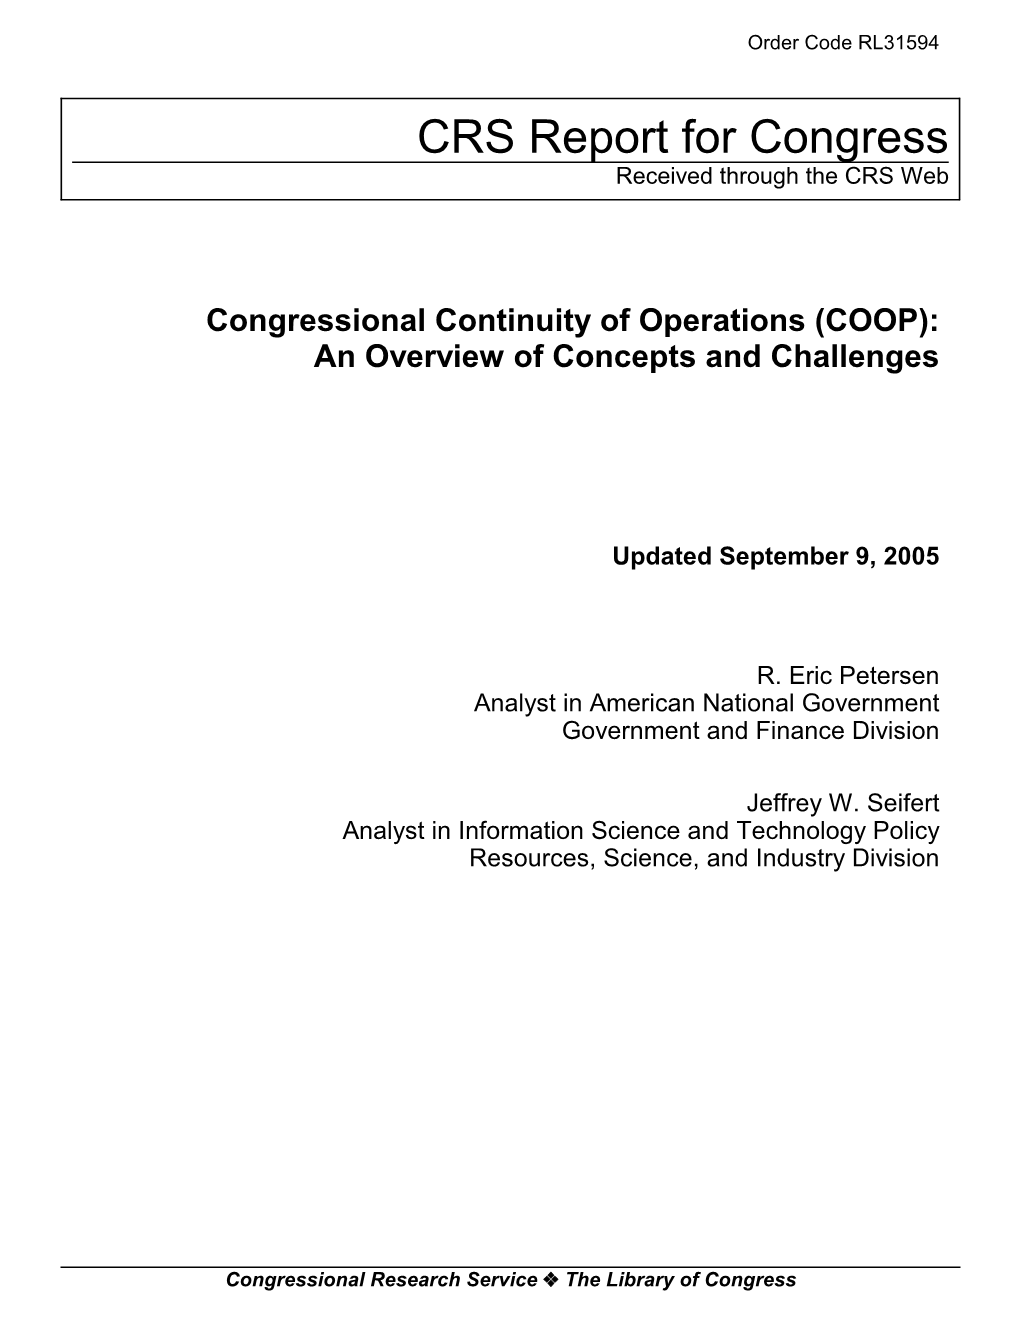 Congressional Continuity of Operations (COOP): an Overview of Concepts and Challenges